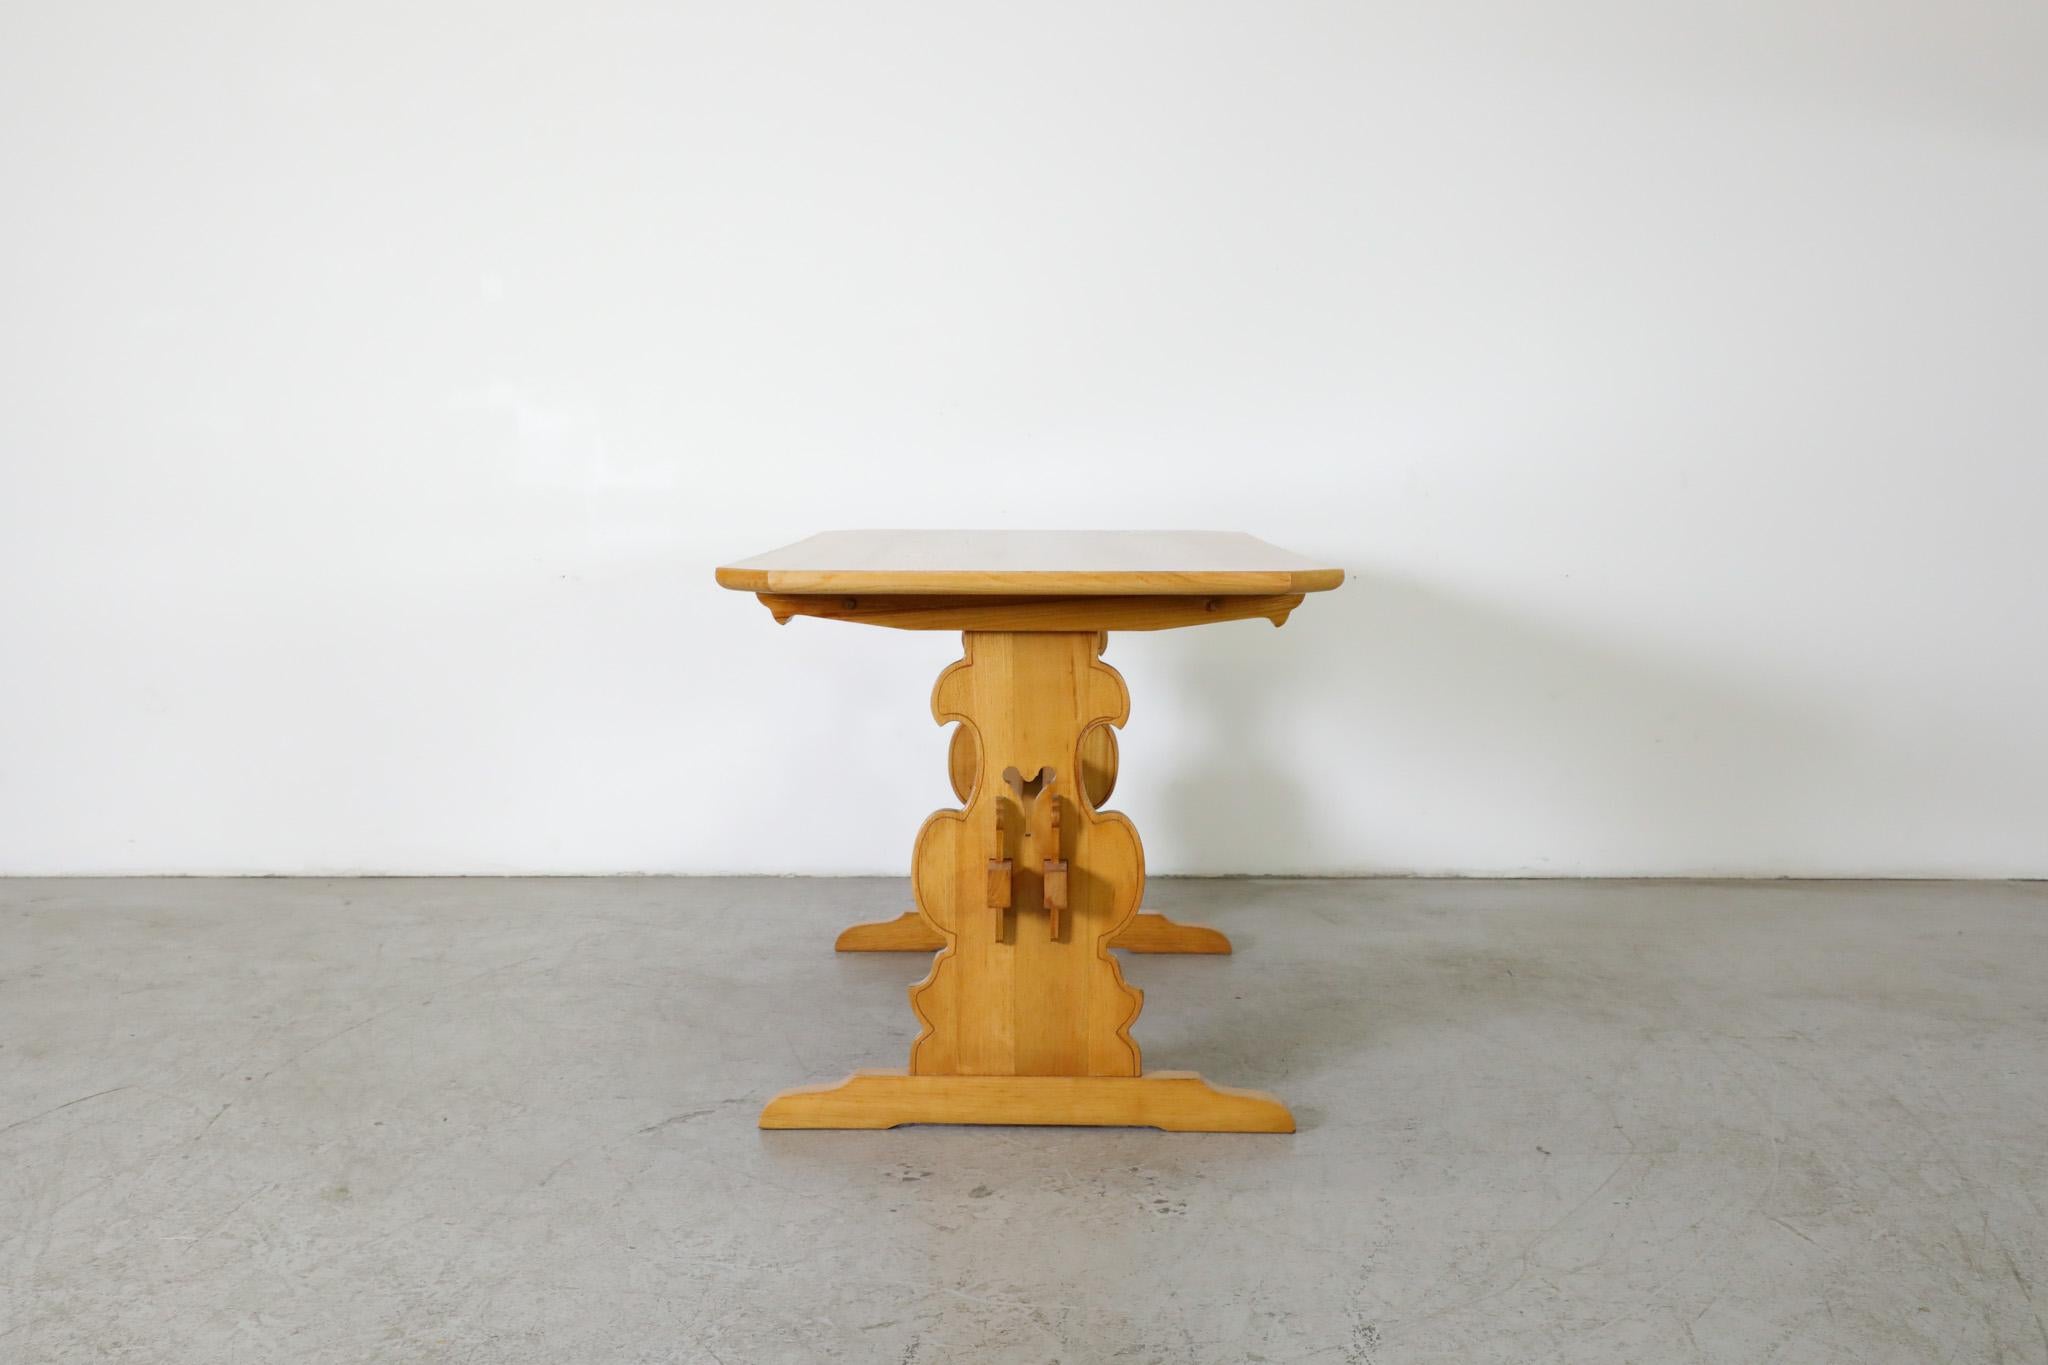 Mid-Century Tyrolean style carved Oak dining table with trestle base, clipped corners and ornately detailed carvings. An attractive and versatile table that can be used as in an entry way, desk or vanity. In original condition with visible wear